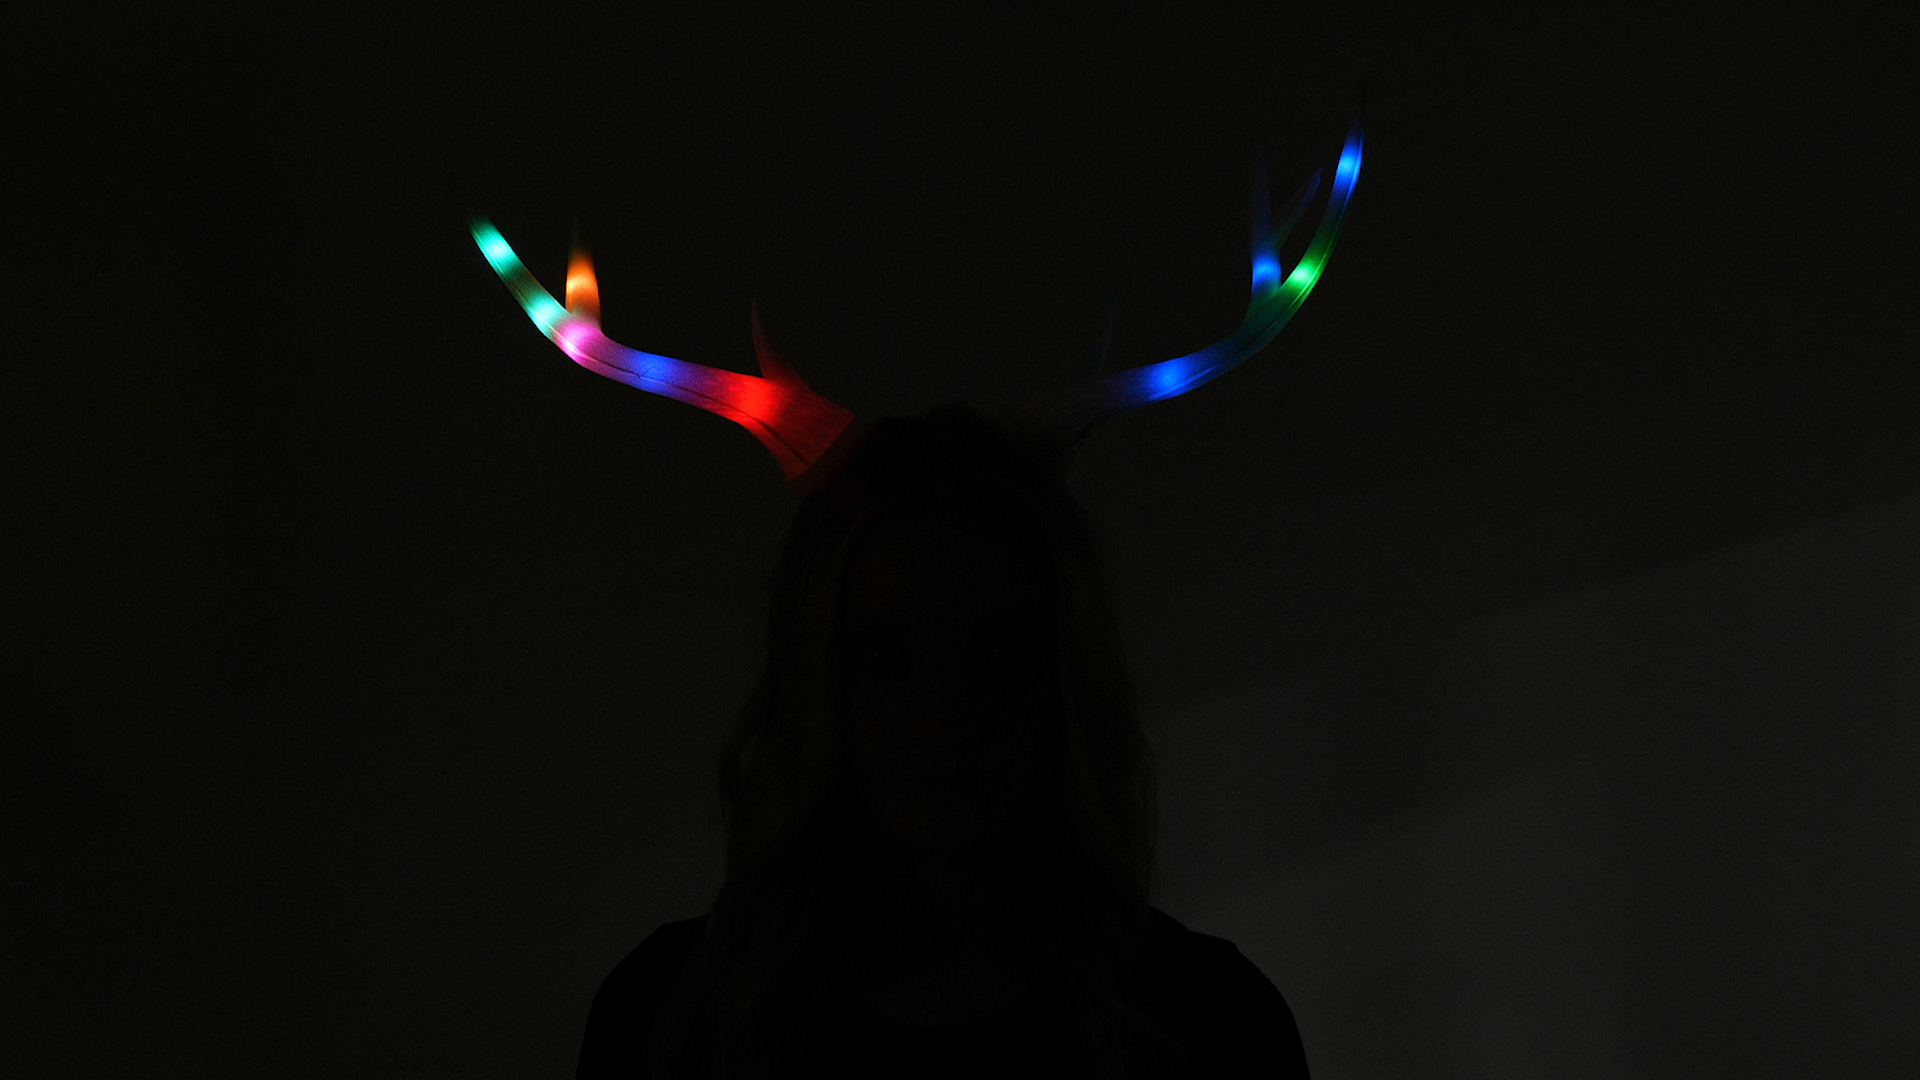 Add a little flair and color to your deer costume with the Light-Up Deer Antlers Multicolor LumenHorns. These tall deer horns won't only make you stand out in a crowd (because of the lights) but they glow multicolor too!